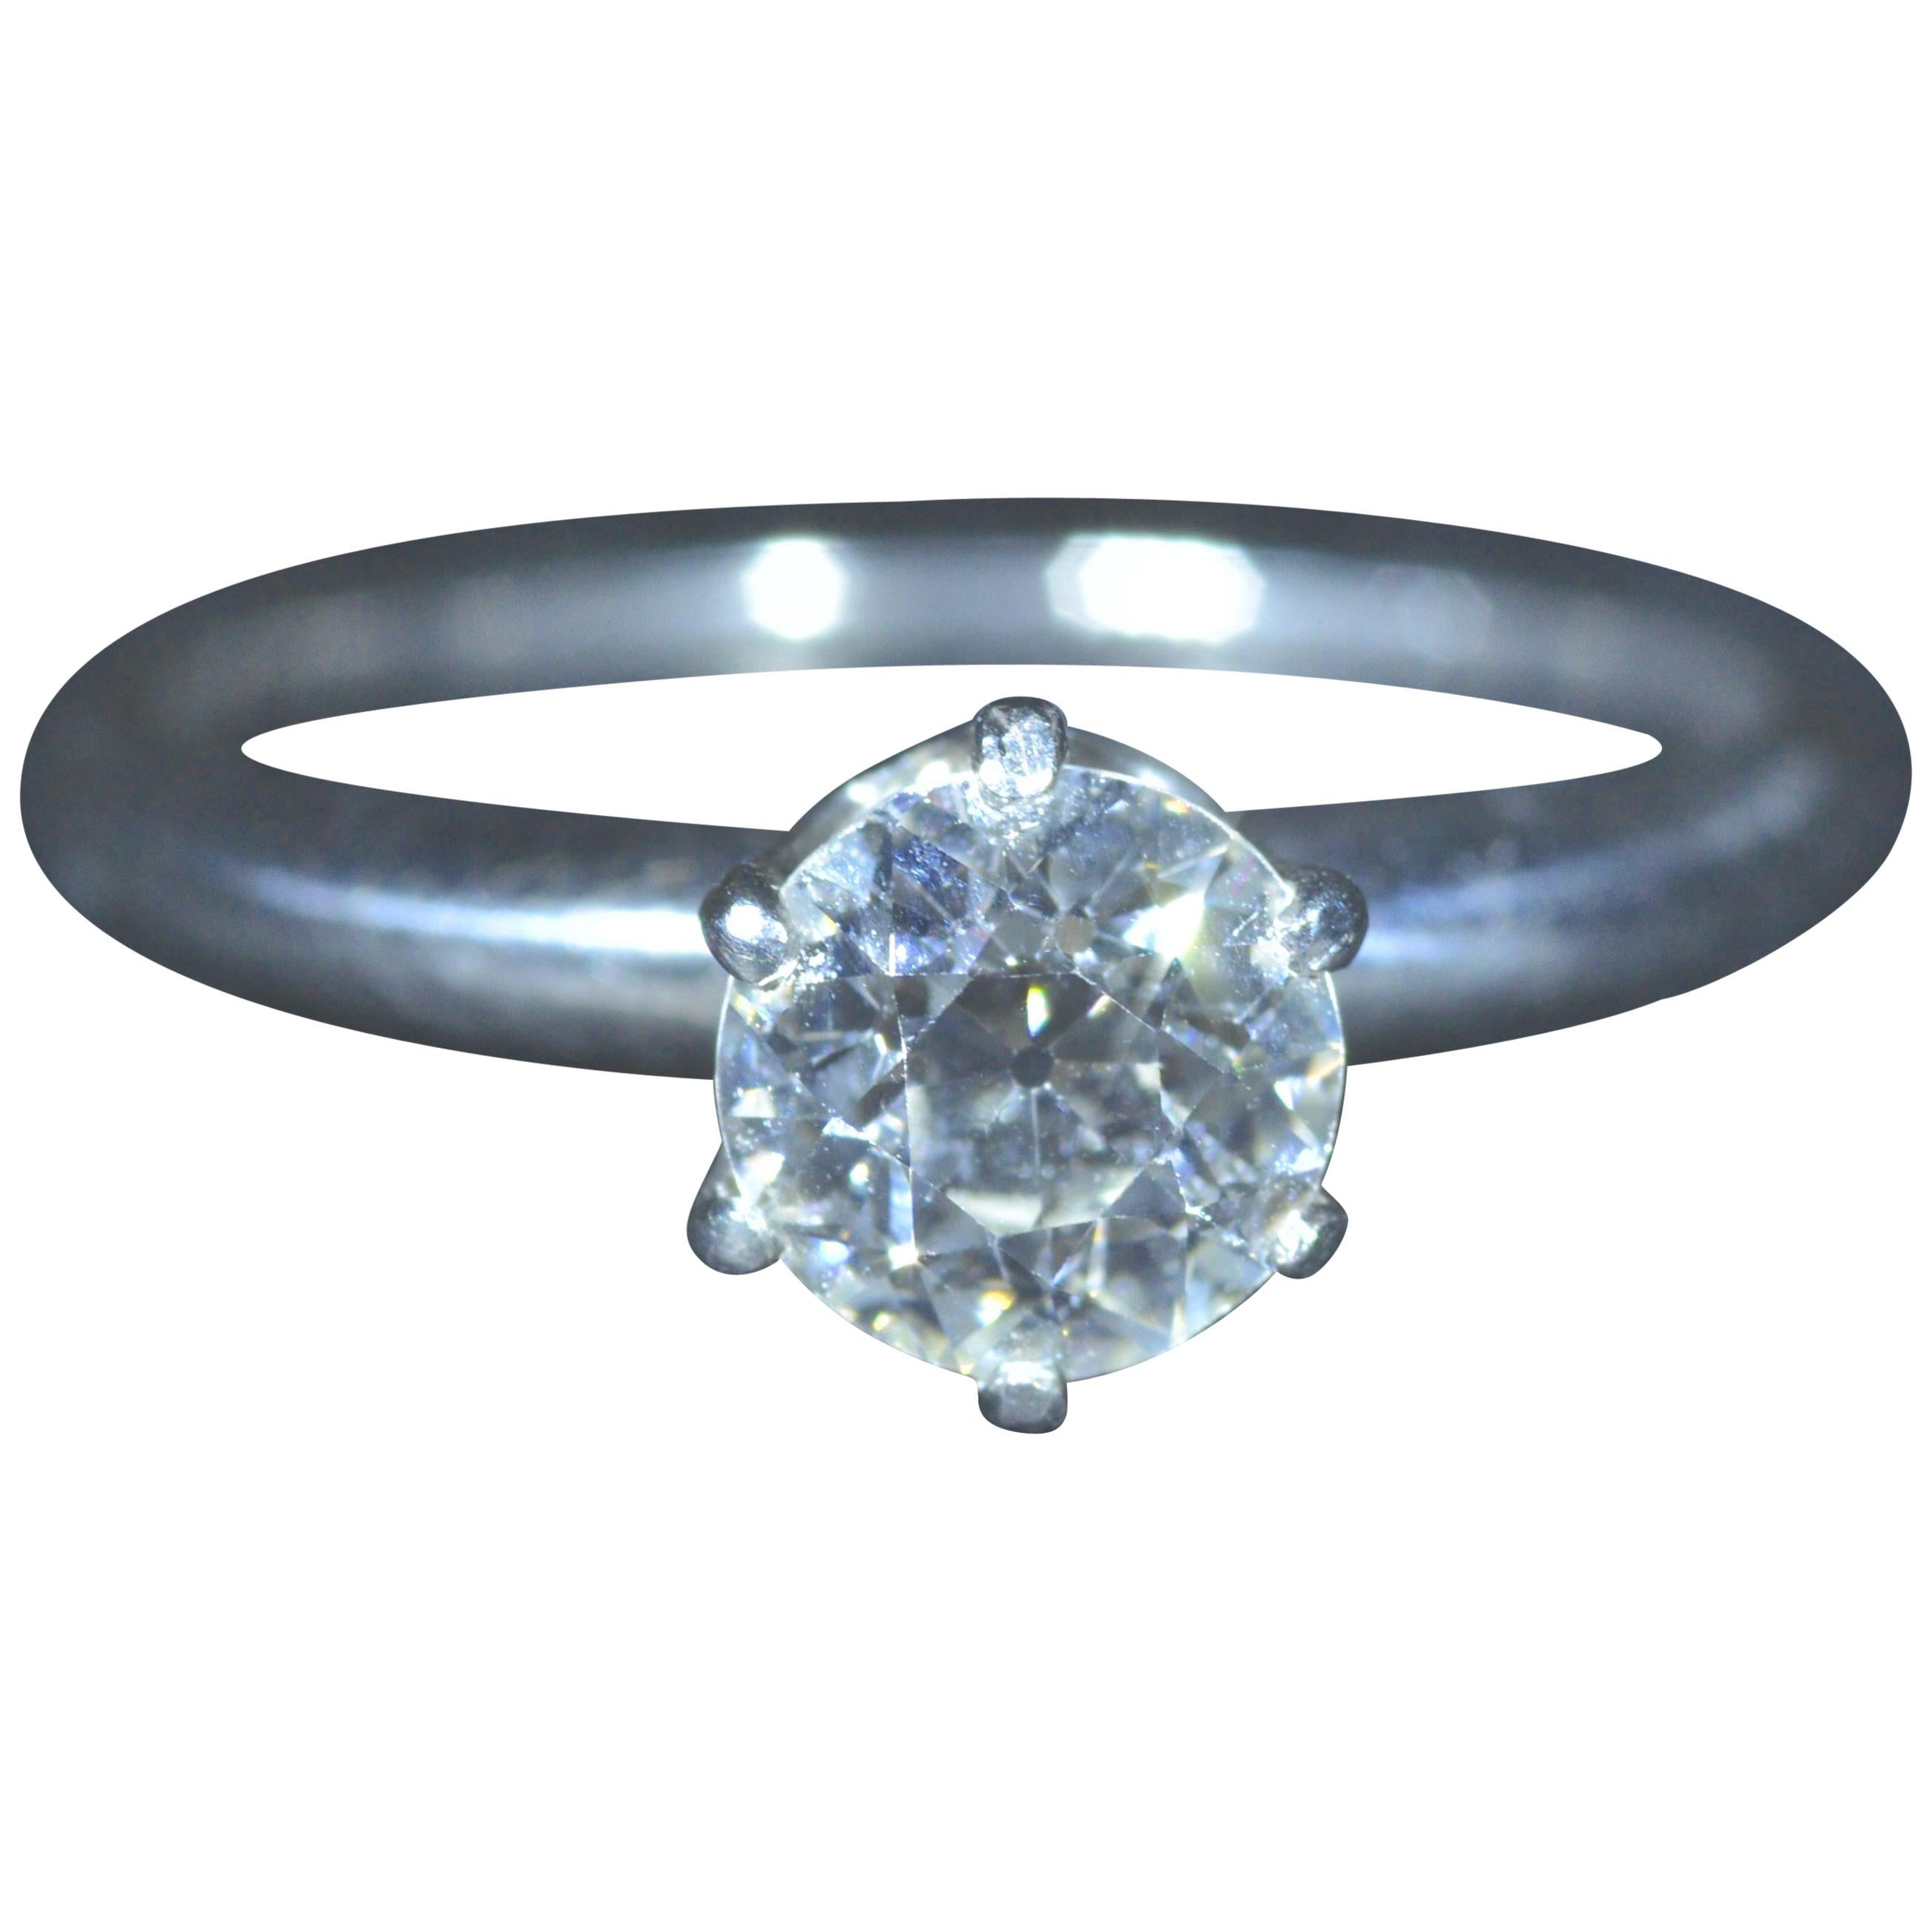 Antique Tiffany & Co. Solitaire Engagement Ring with 0.85 Carat Diamond For Sale